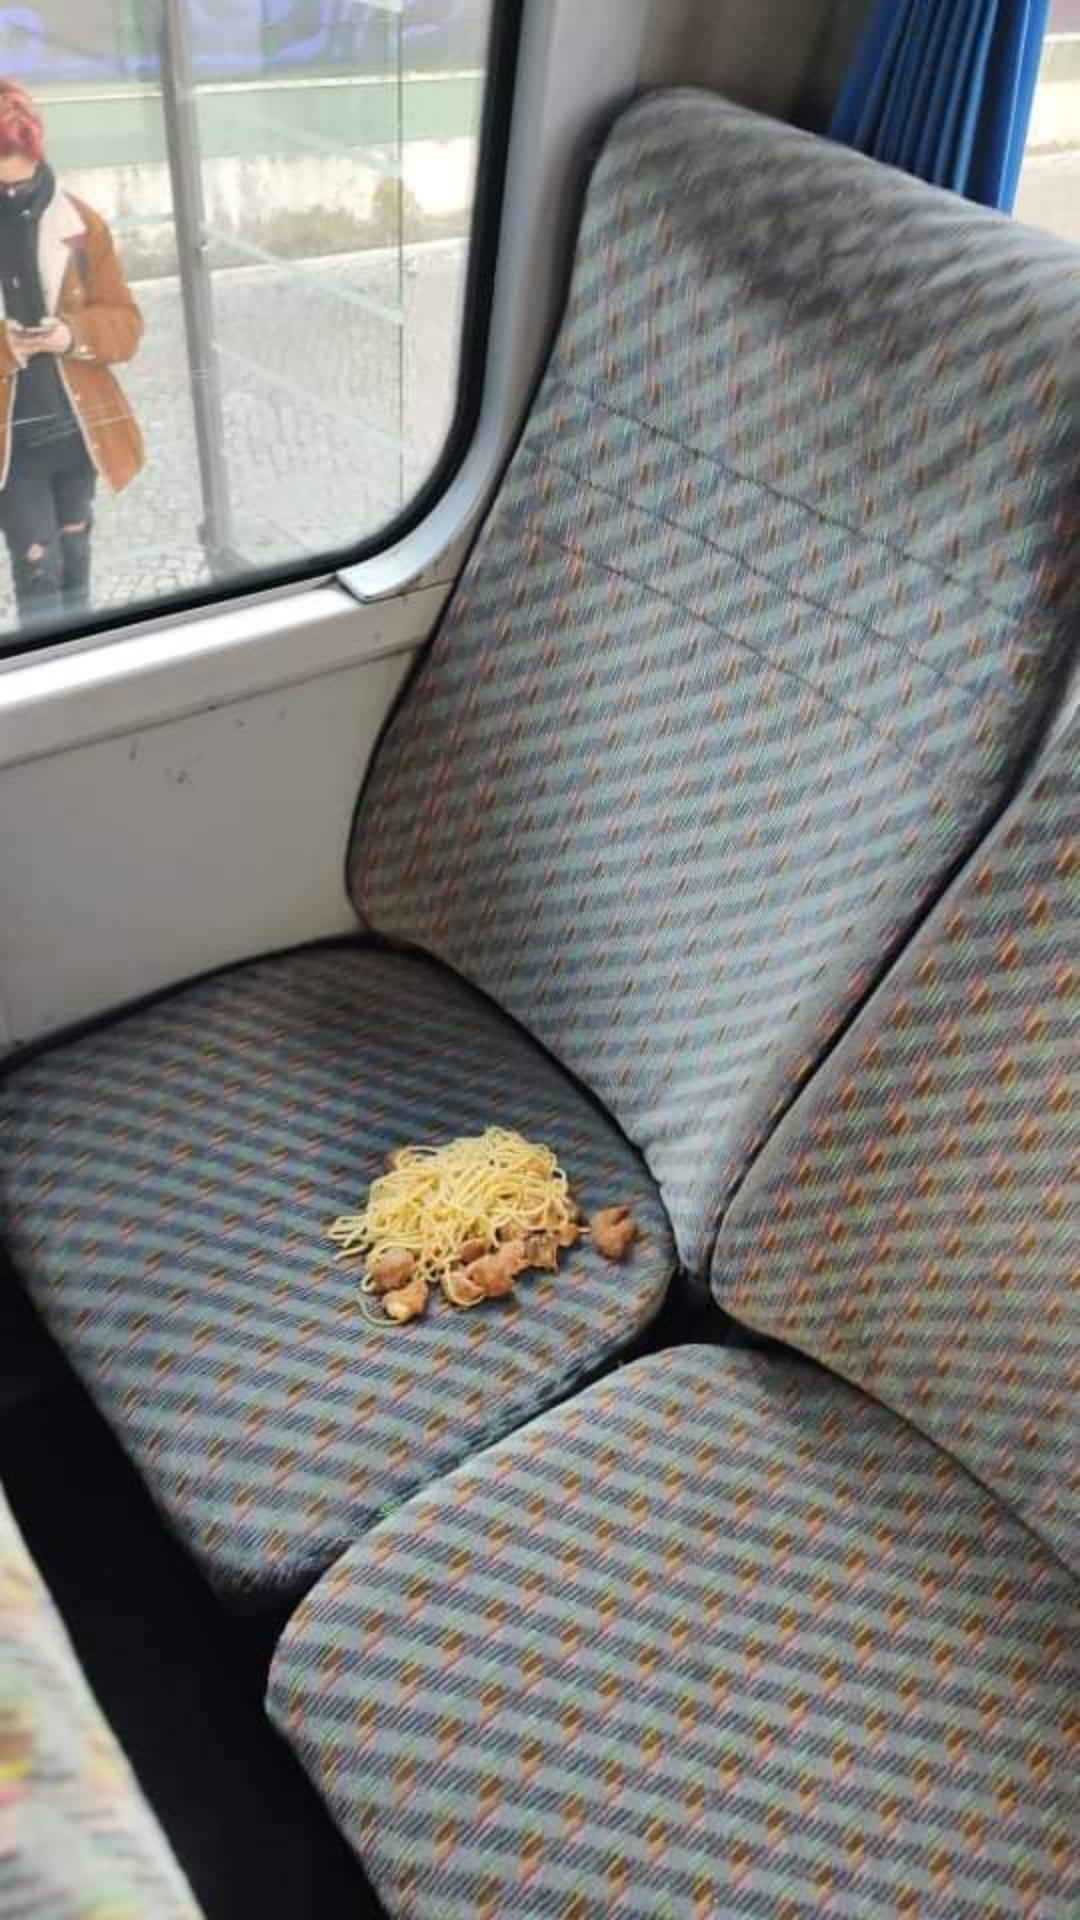 Spaghetti spilled on a patterned seat inside a train, with a passenger standing in the background